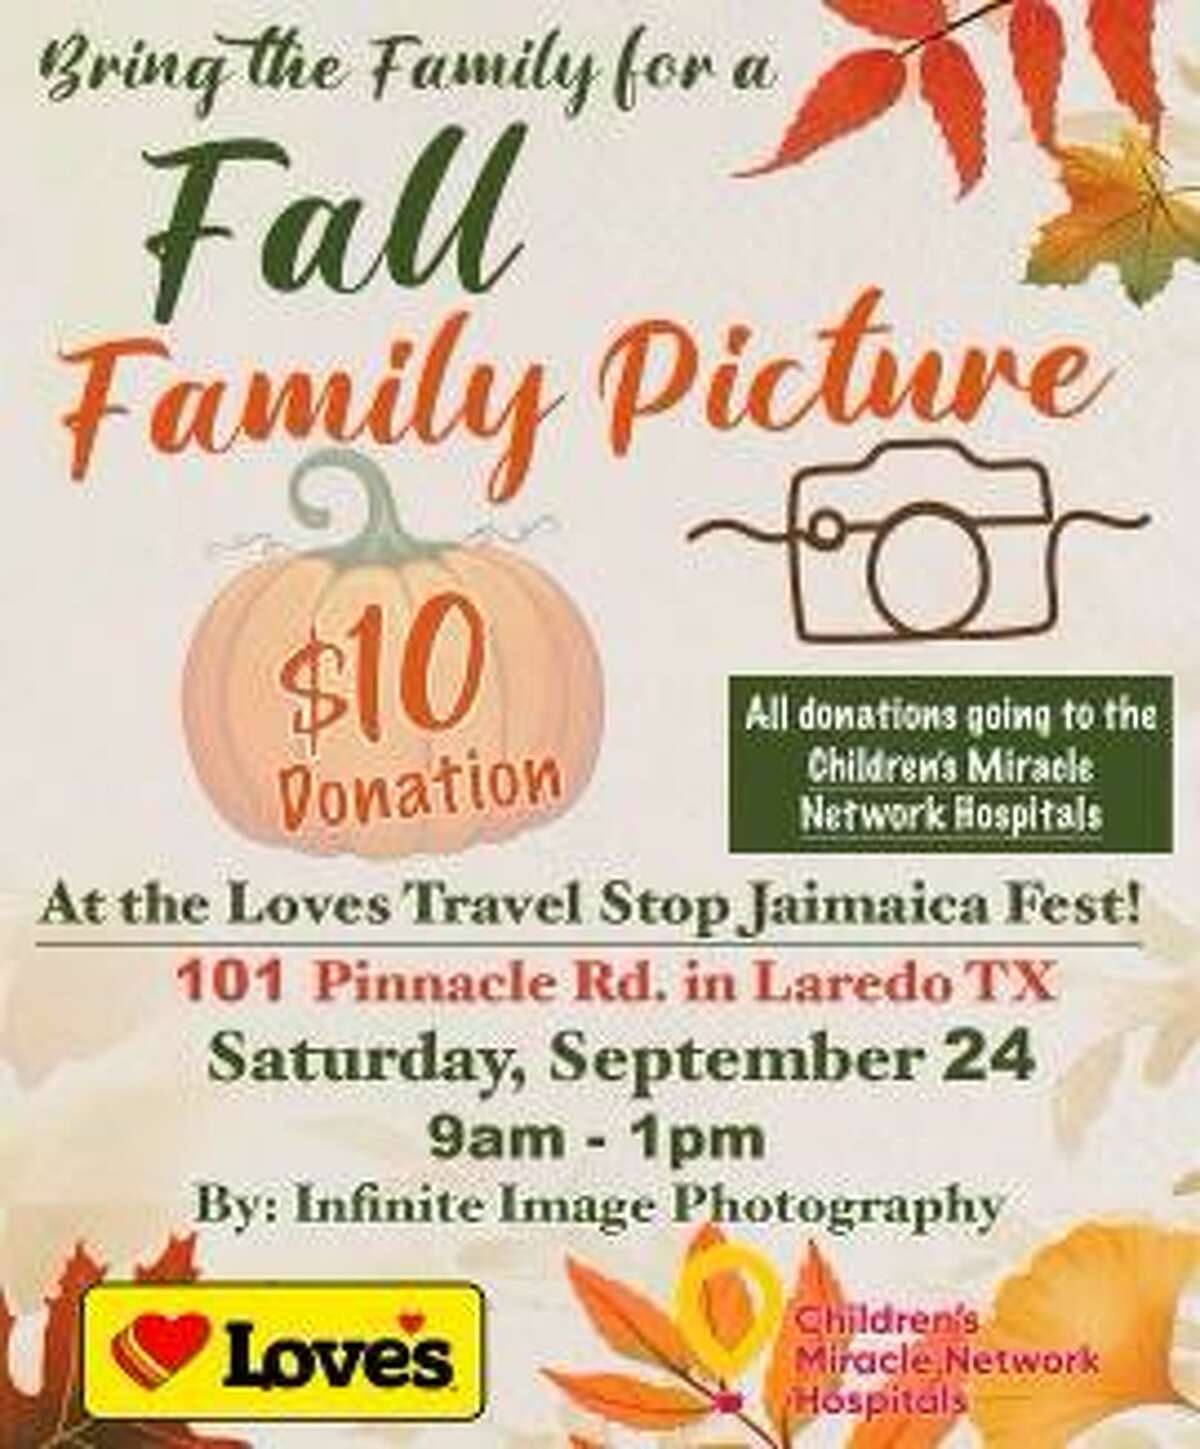 Love's Travel Stop will be holding a Jamaica Fest at 101 at Pinnacle Road to help raise fund for the Children's Miracle Network Hospitals Non-Profit Organization. Fall Family Pictures with be taken at the place. The campaign wraps up on September 30th with a raffle with several prizes.  